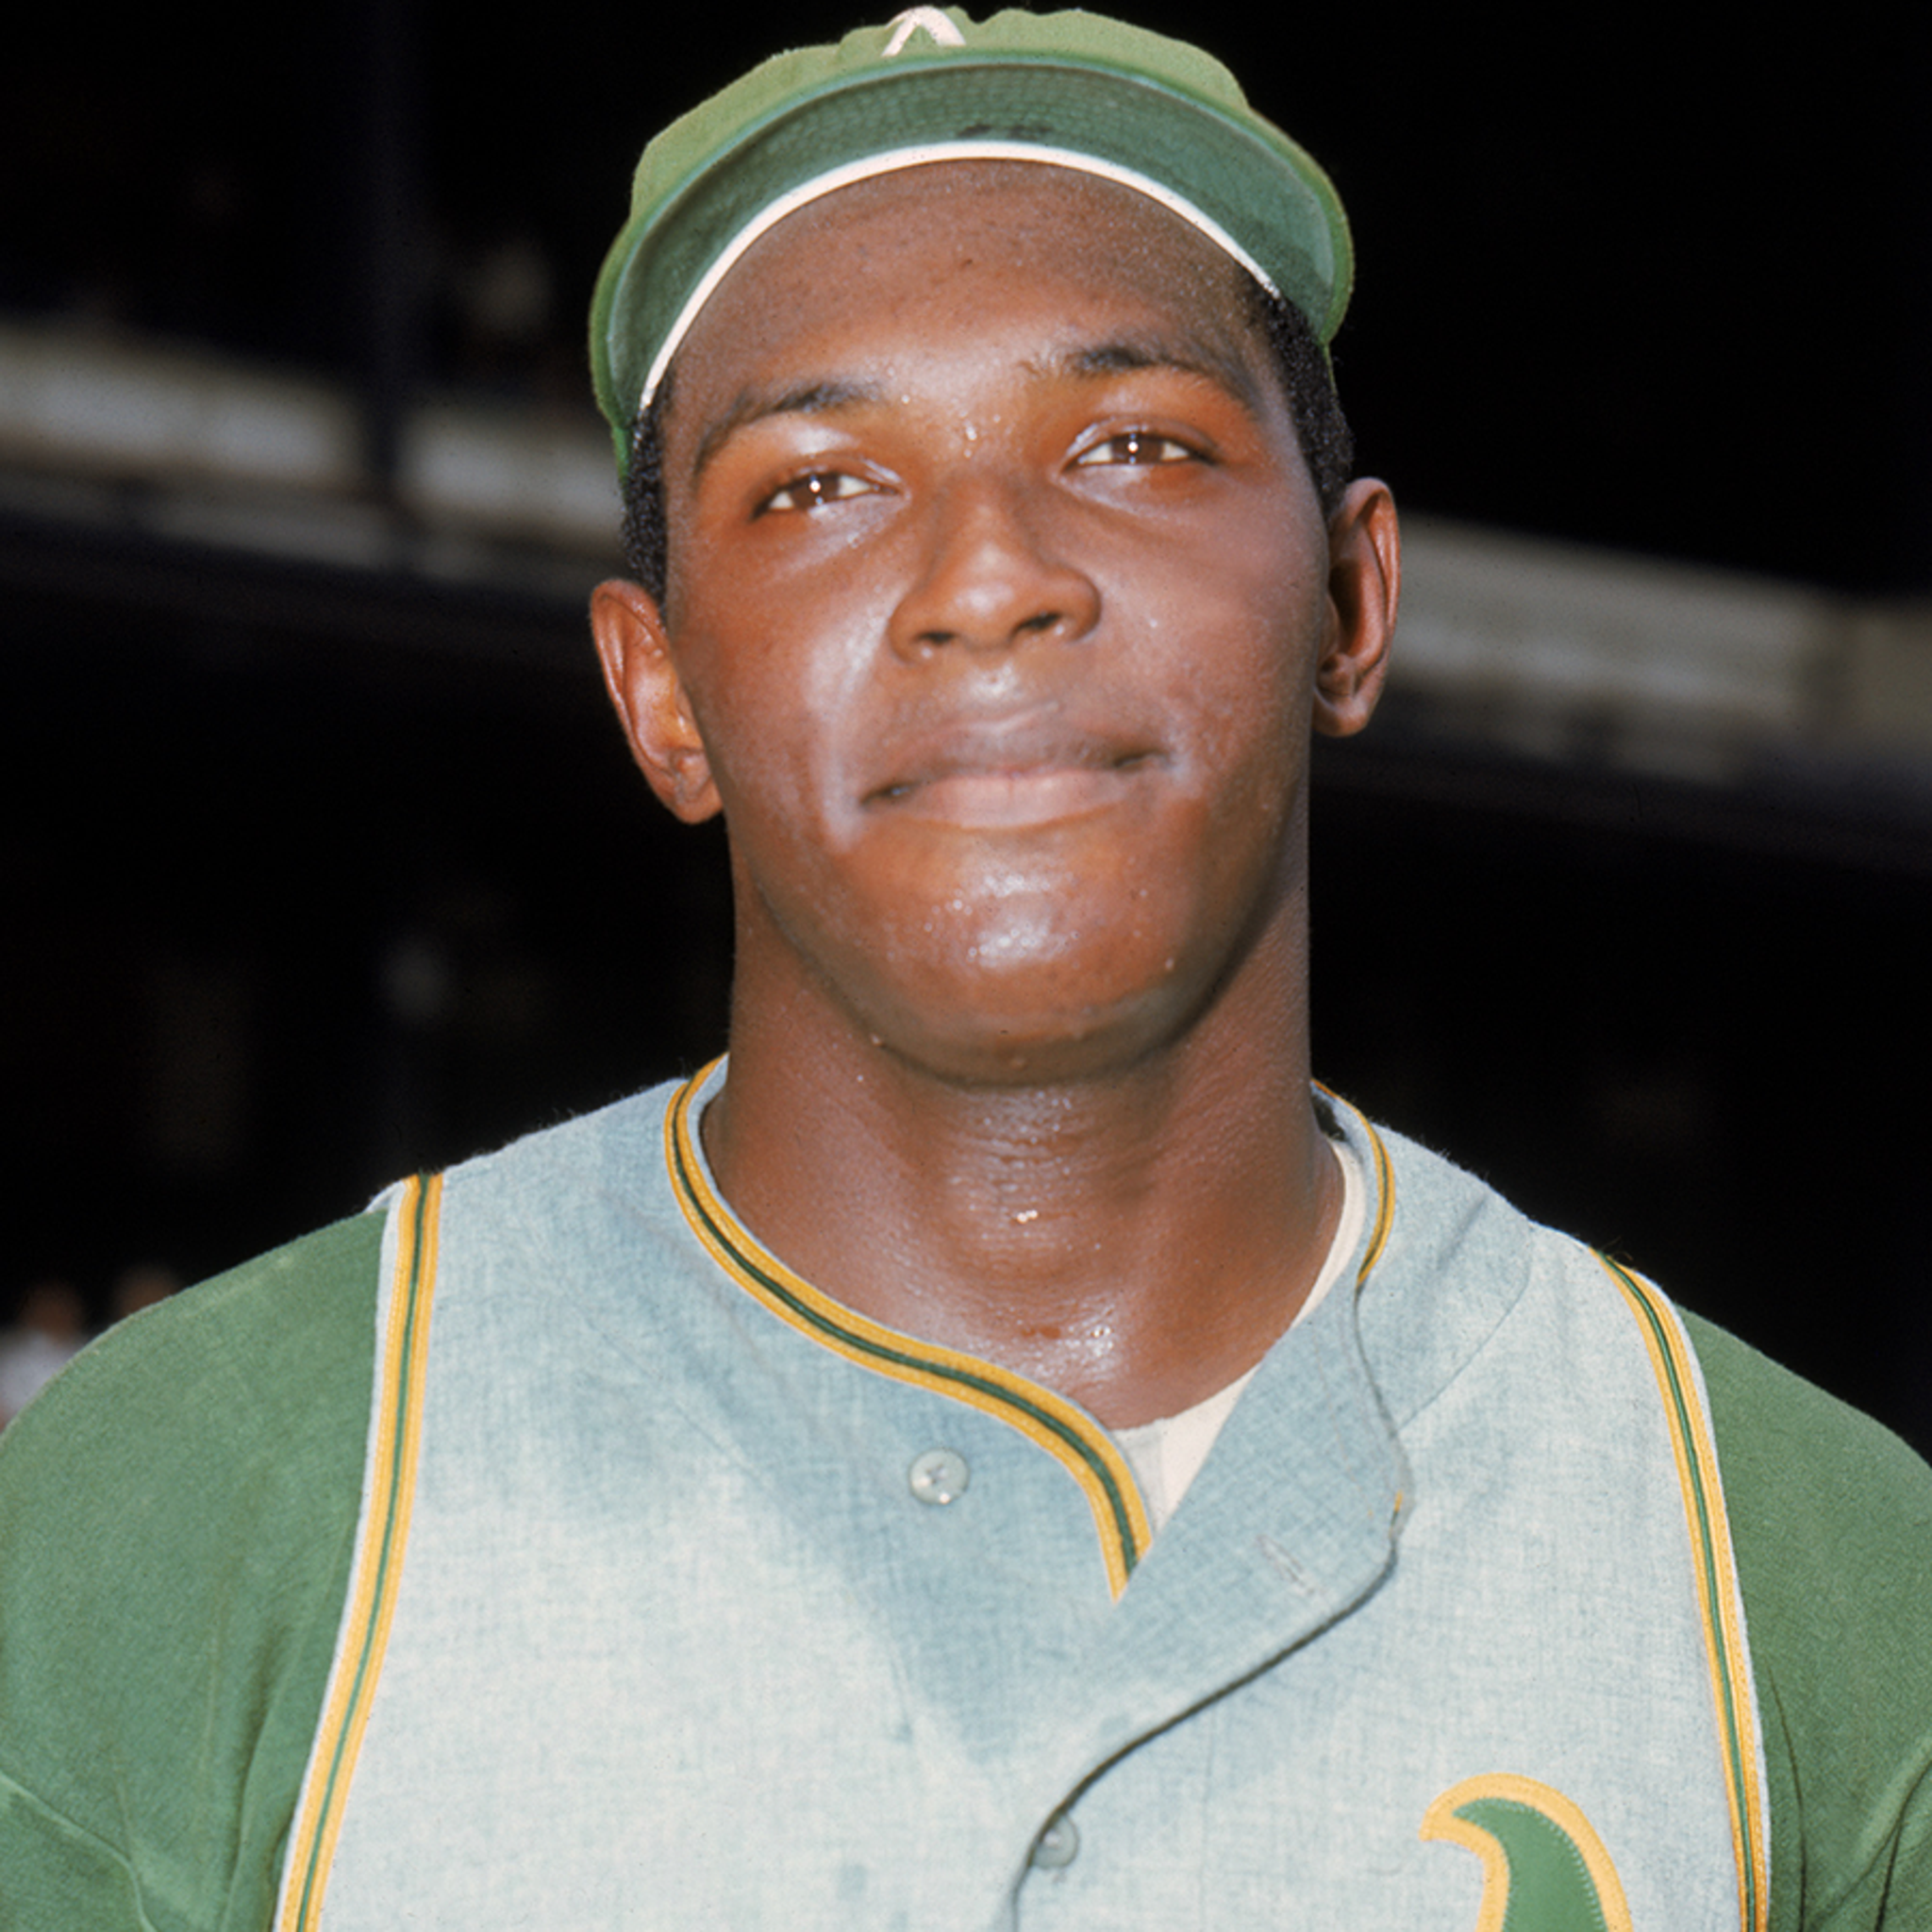 Vida Blue - Oakland A's - Baseball's Most Exciting Young Pitcher